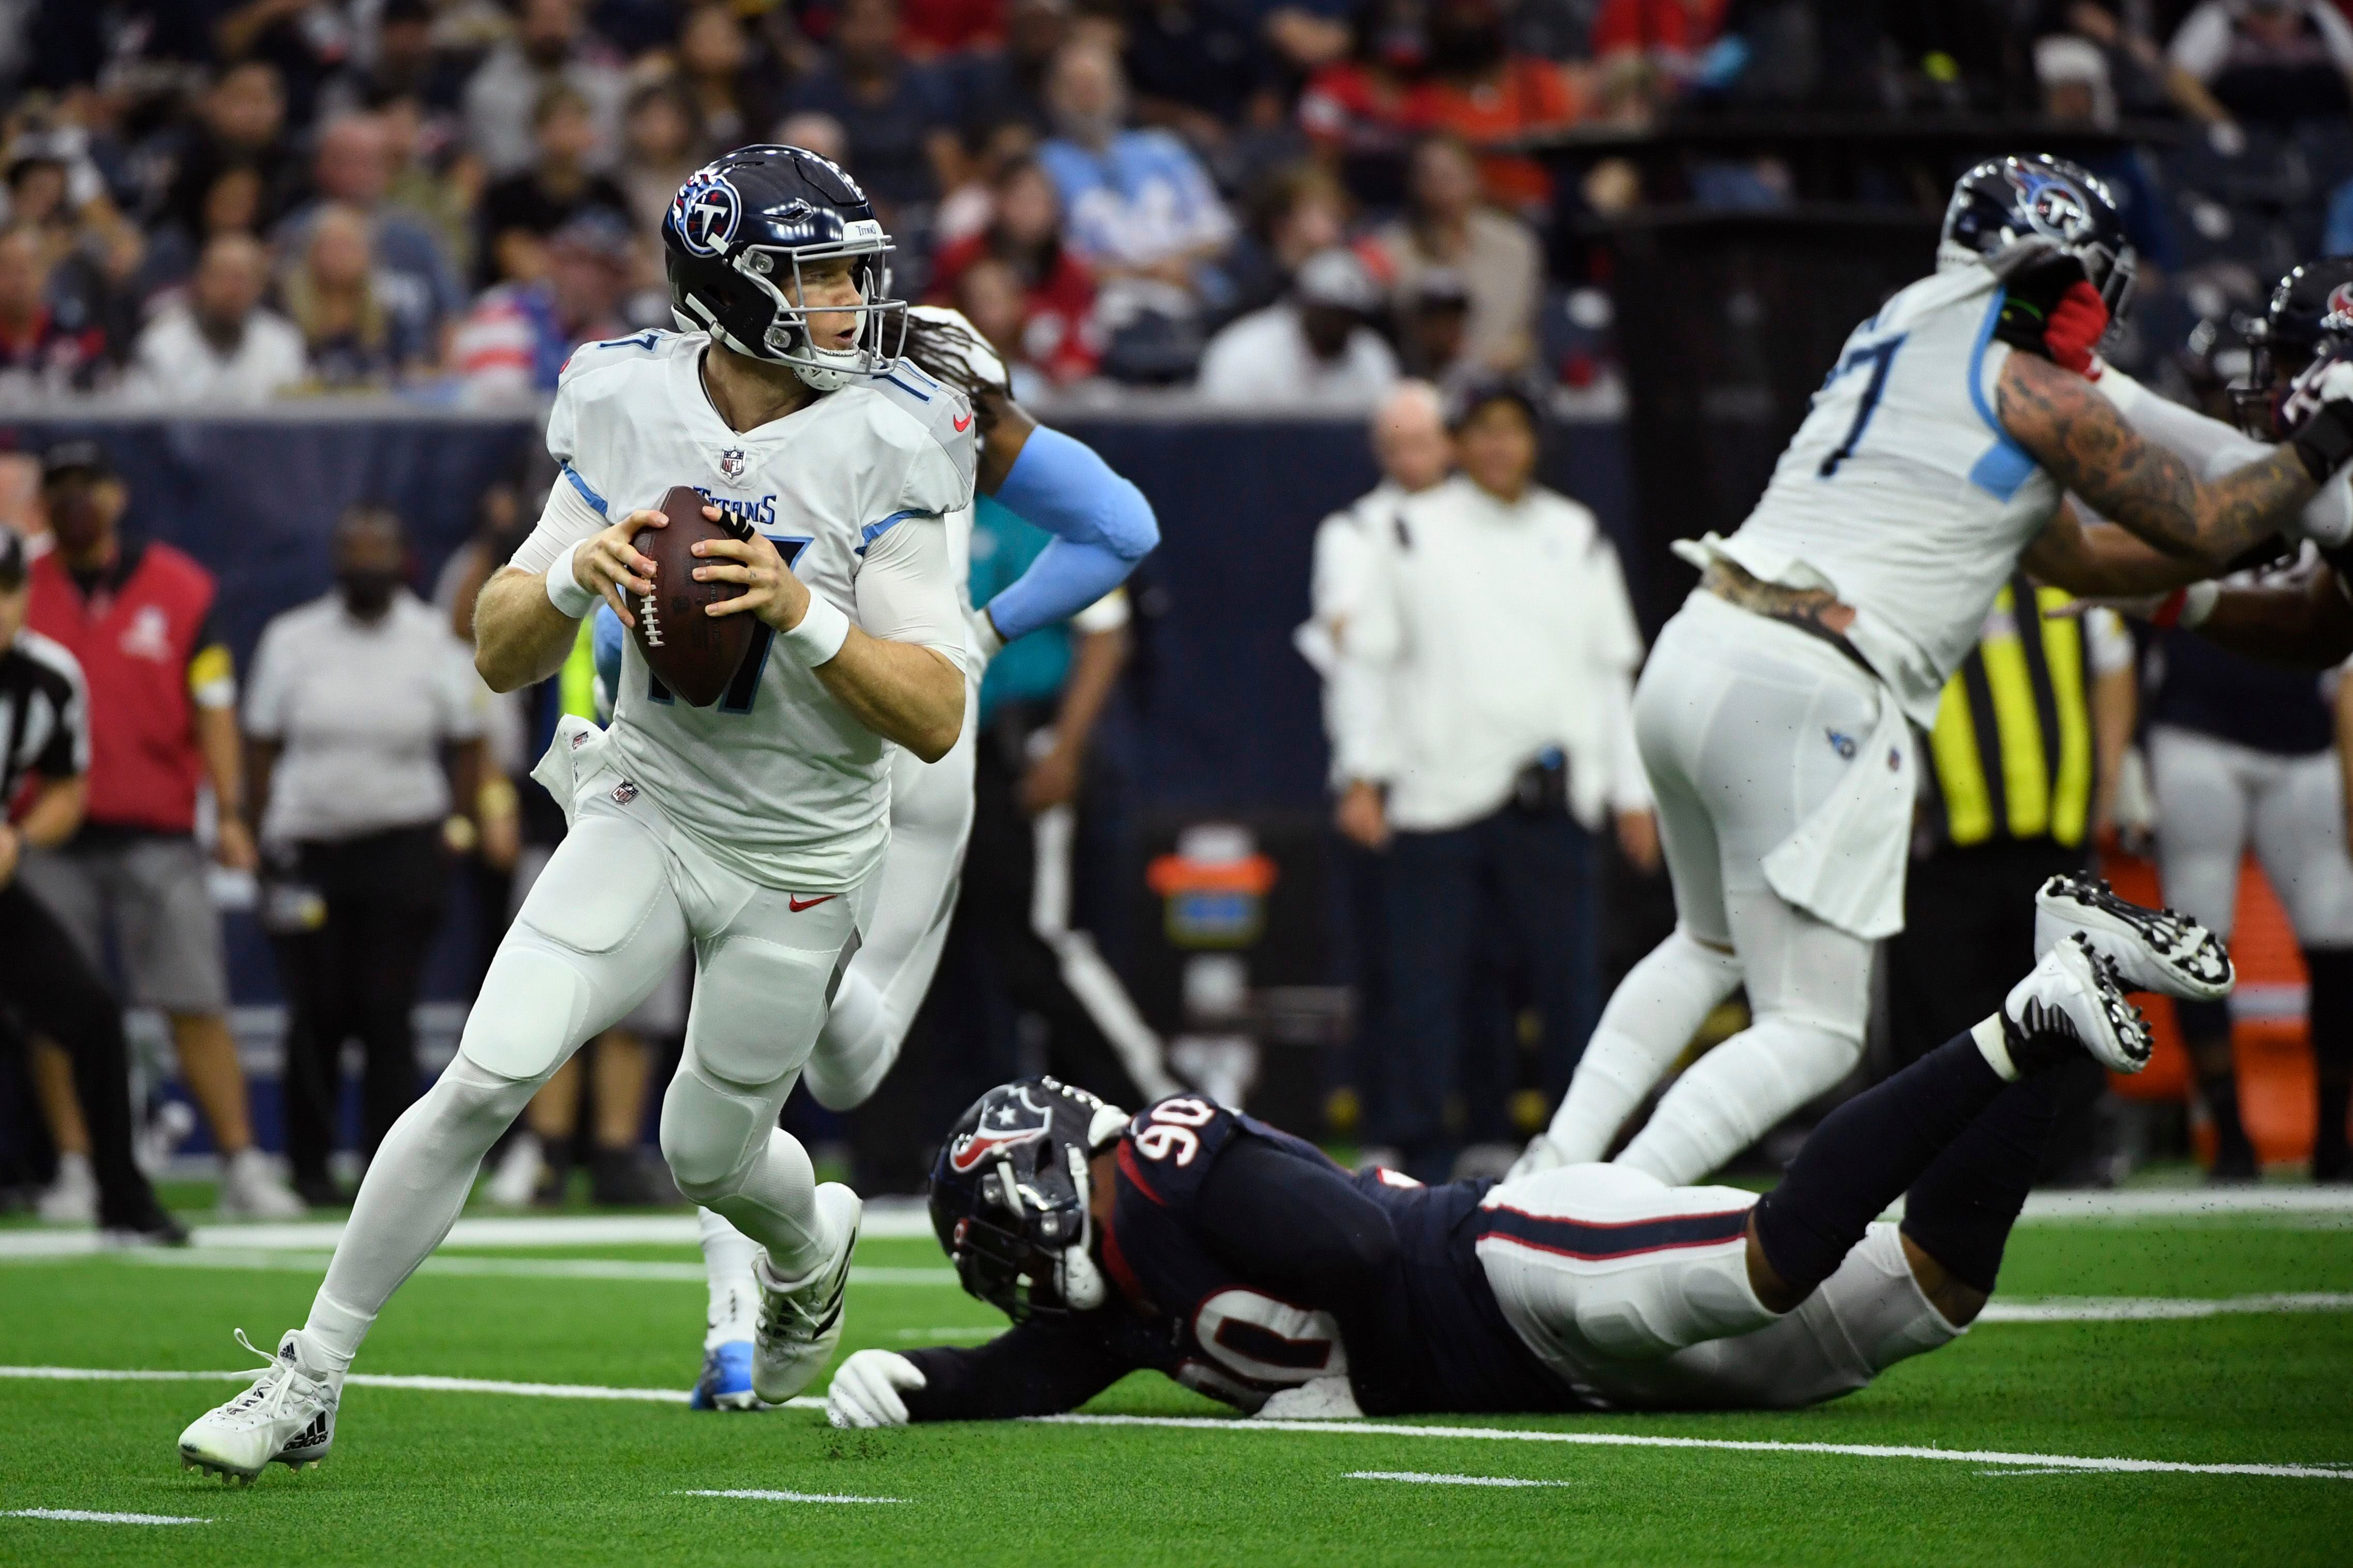 Titans clinch AFC's top seed with 28-25 win over Texans